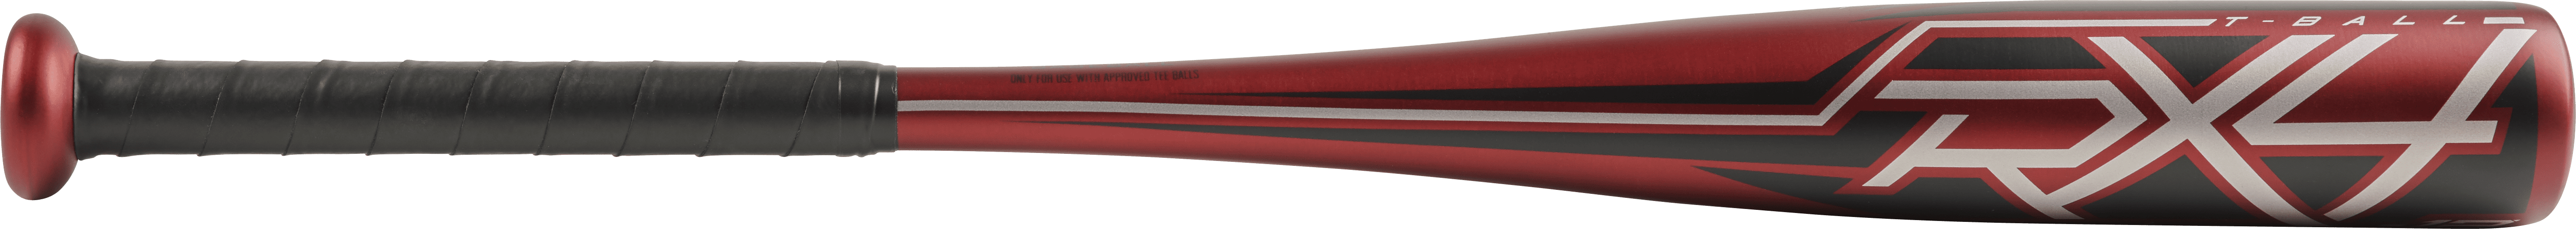 Rawlings RX4 Red Youth T-Ball Bat, 25 inch (-12)